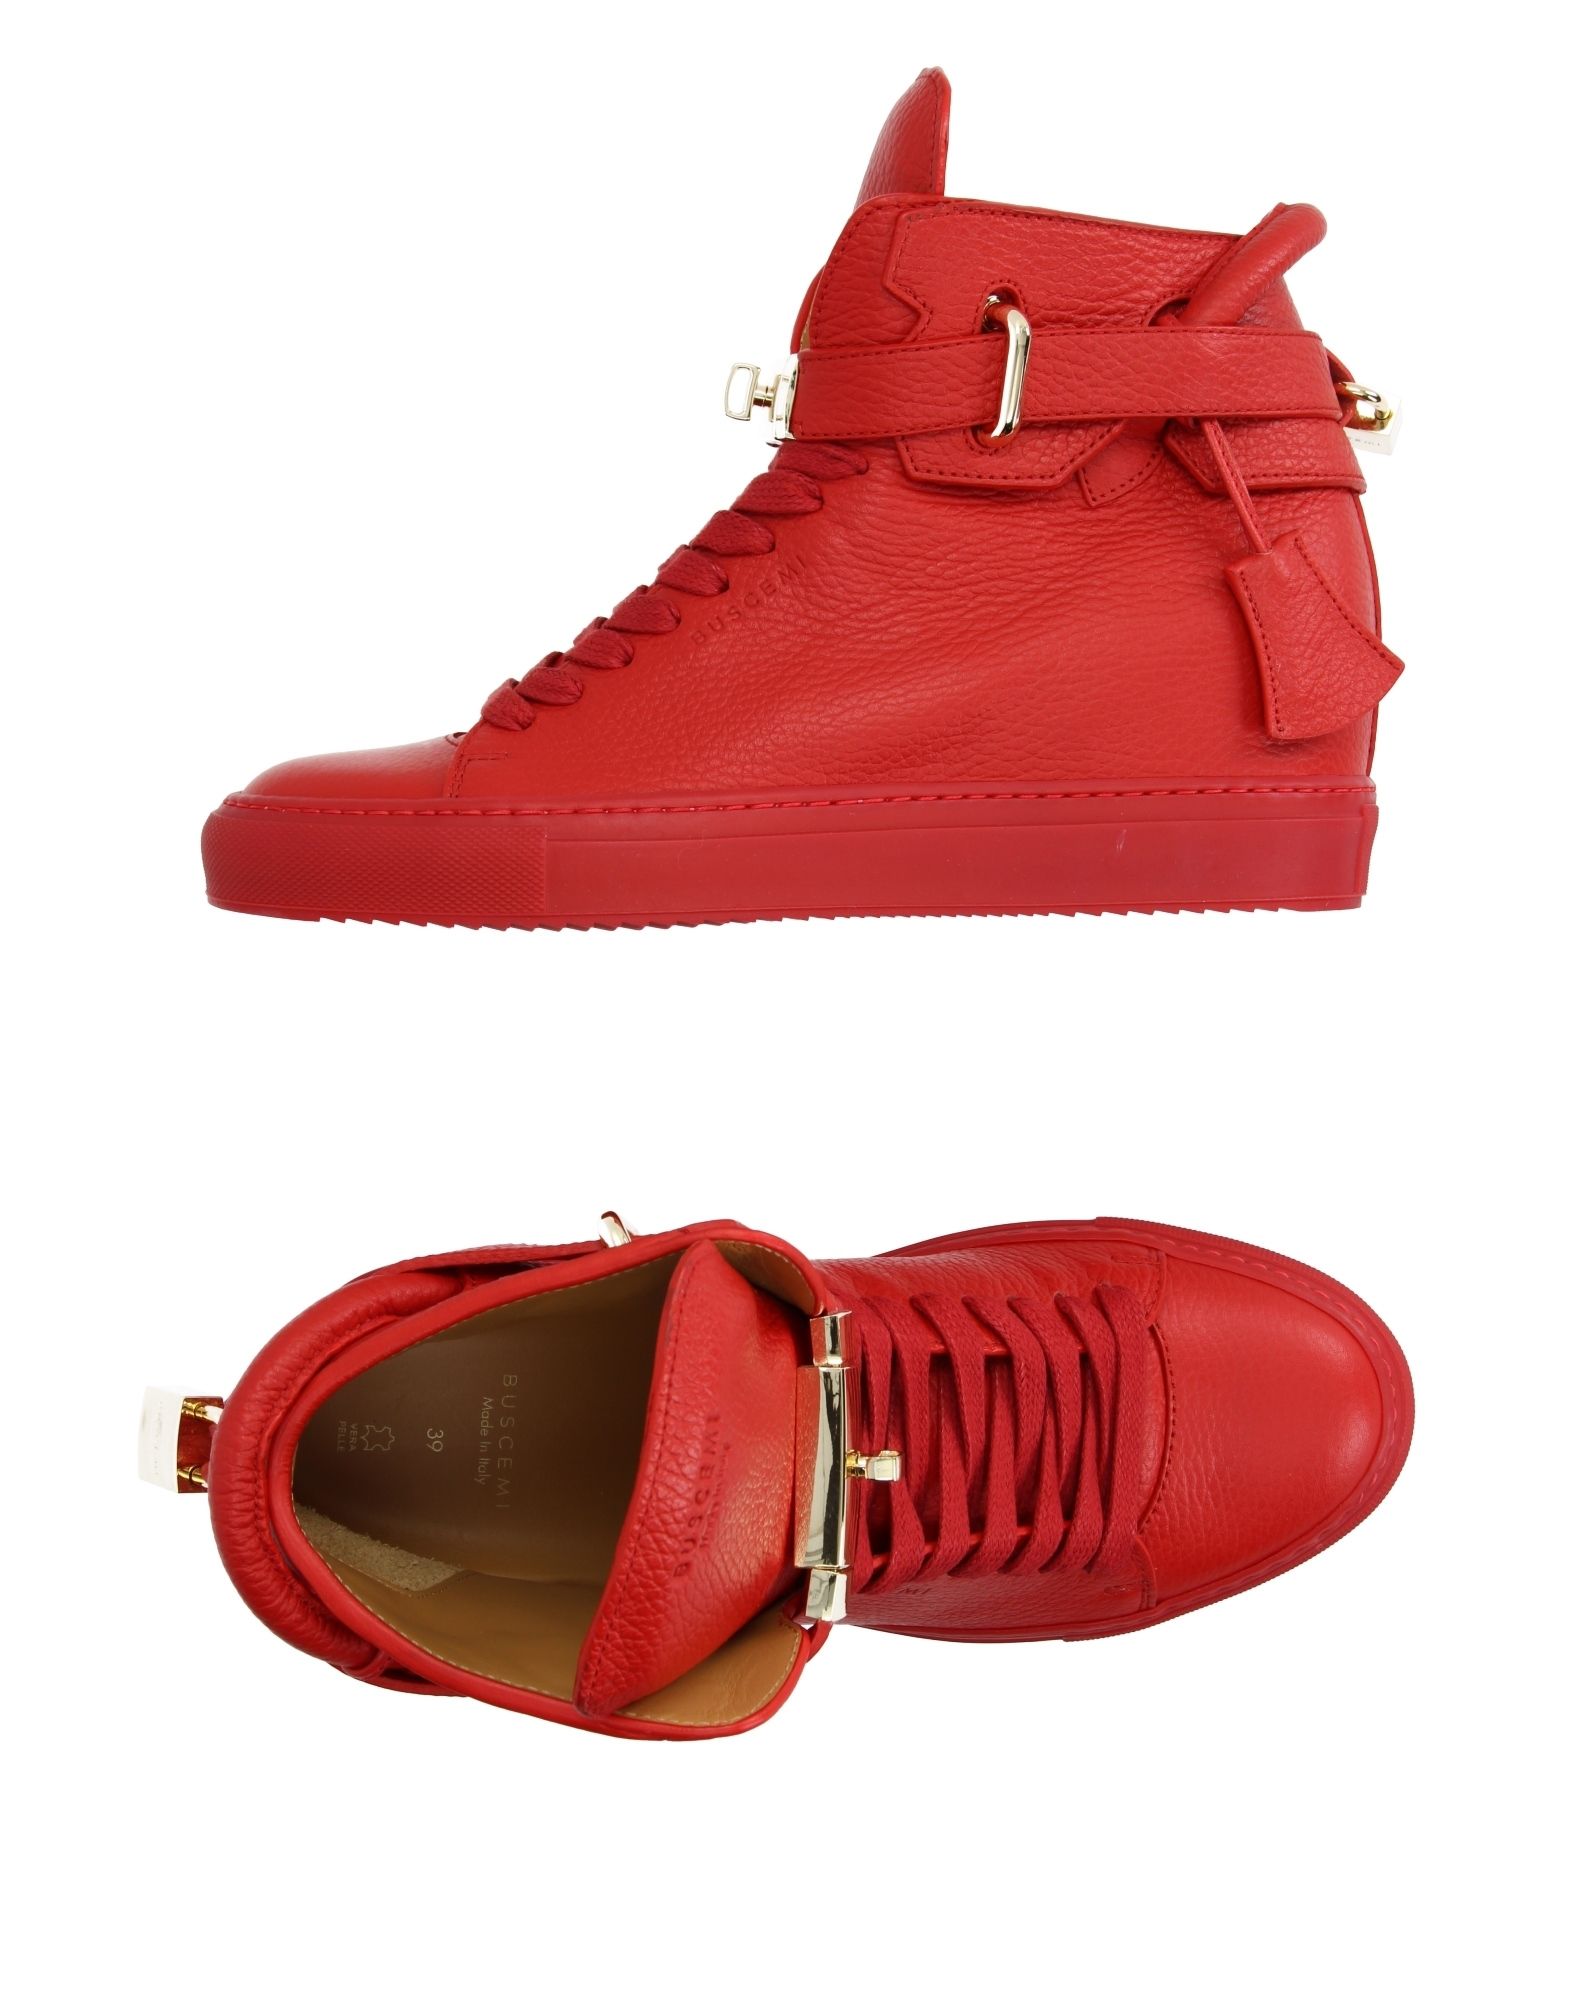 Buscemi Alta Leather Wedge High Top 